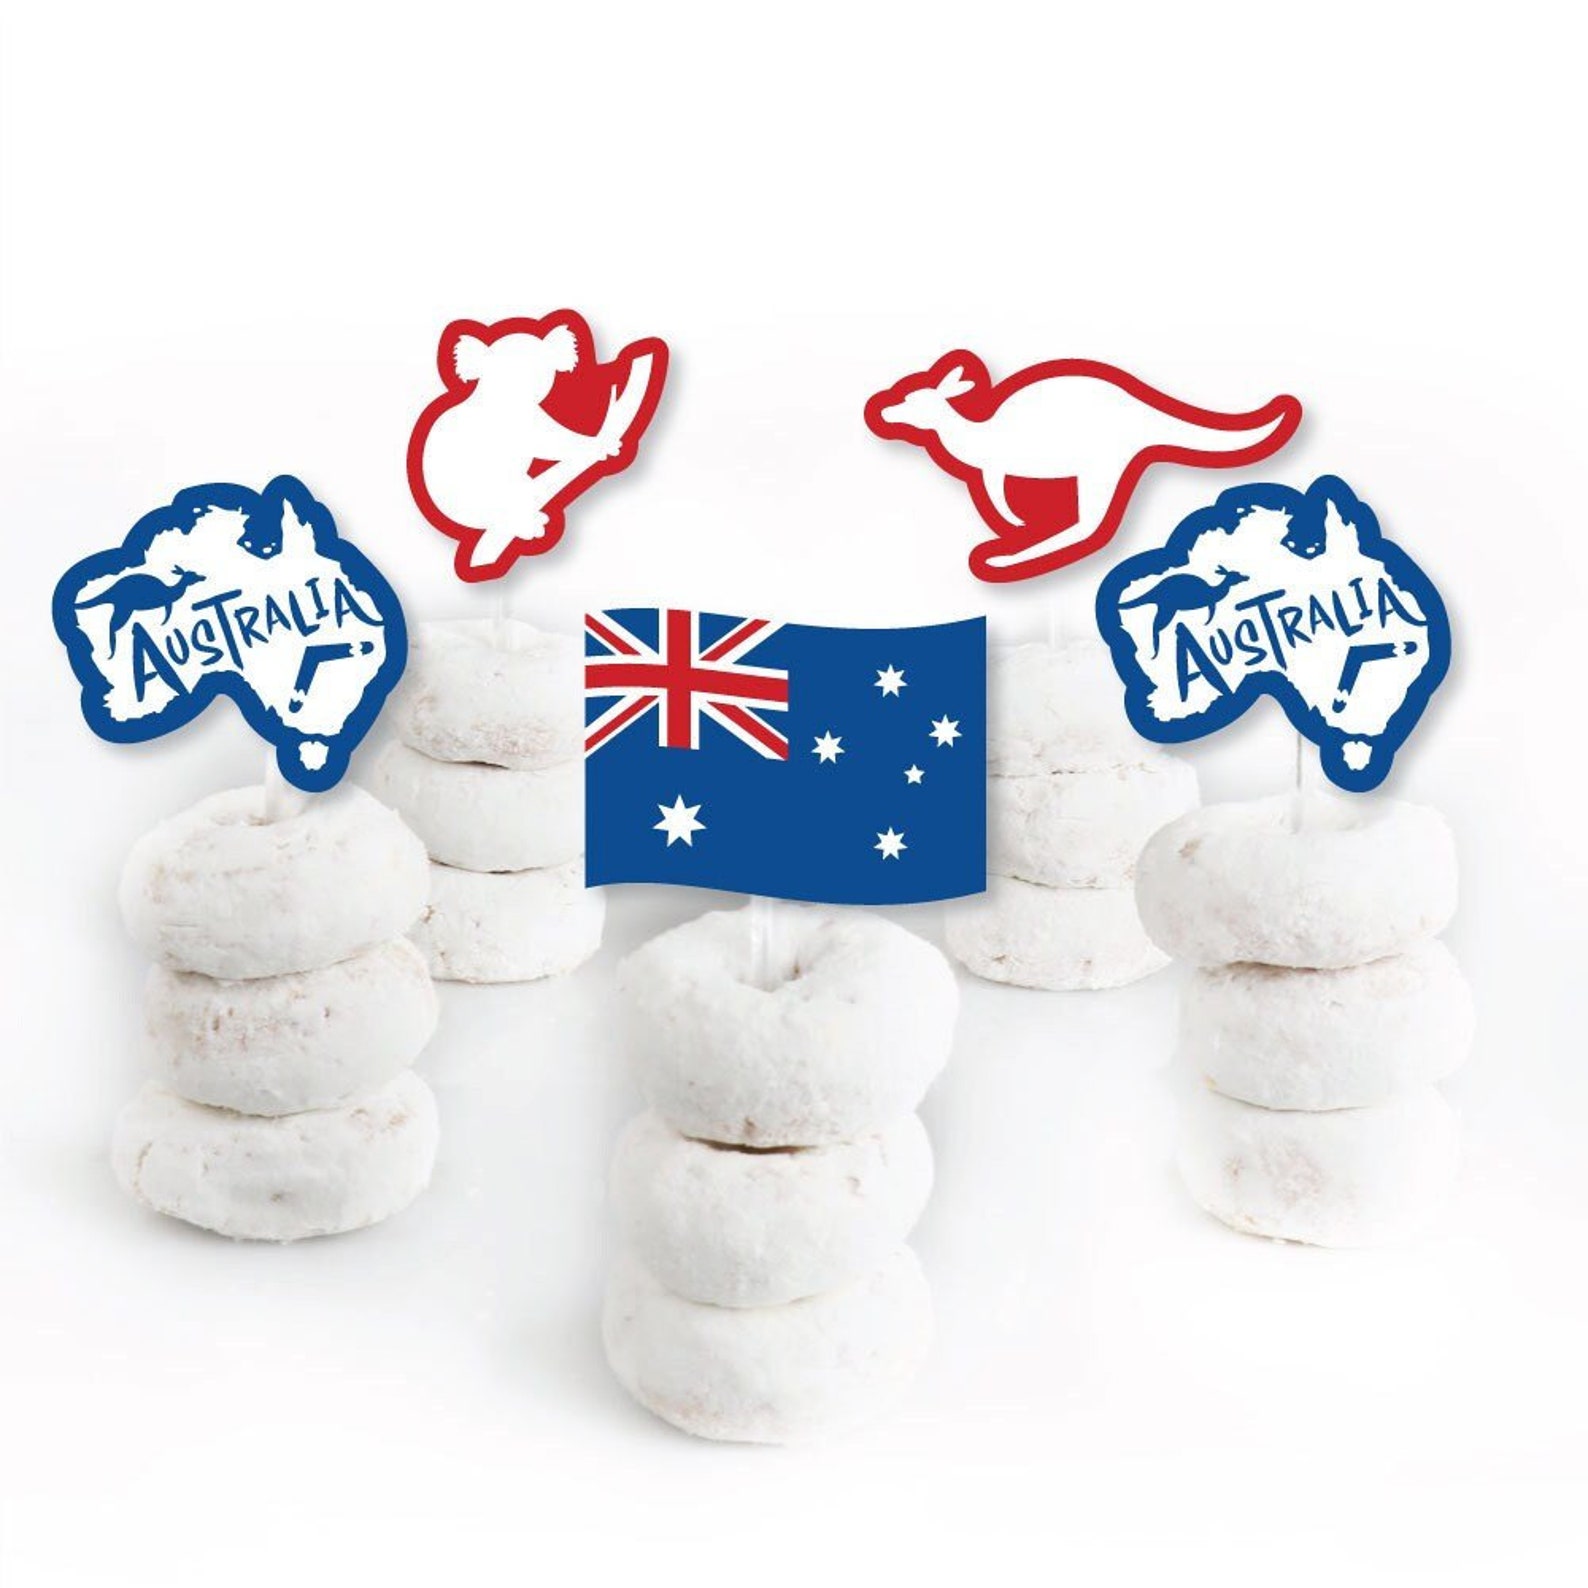 Australia Day Dessert Cupcake Toppers Gday Mate Aussie - Etsy